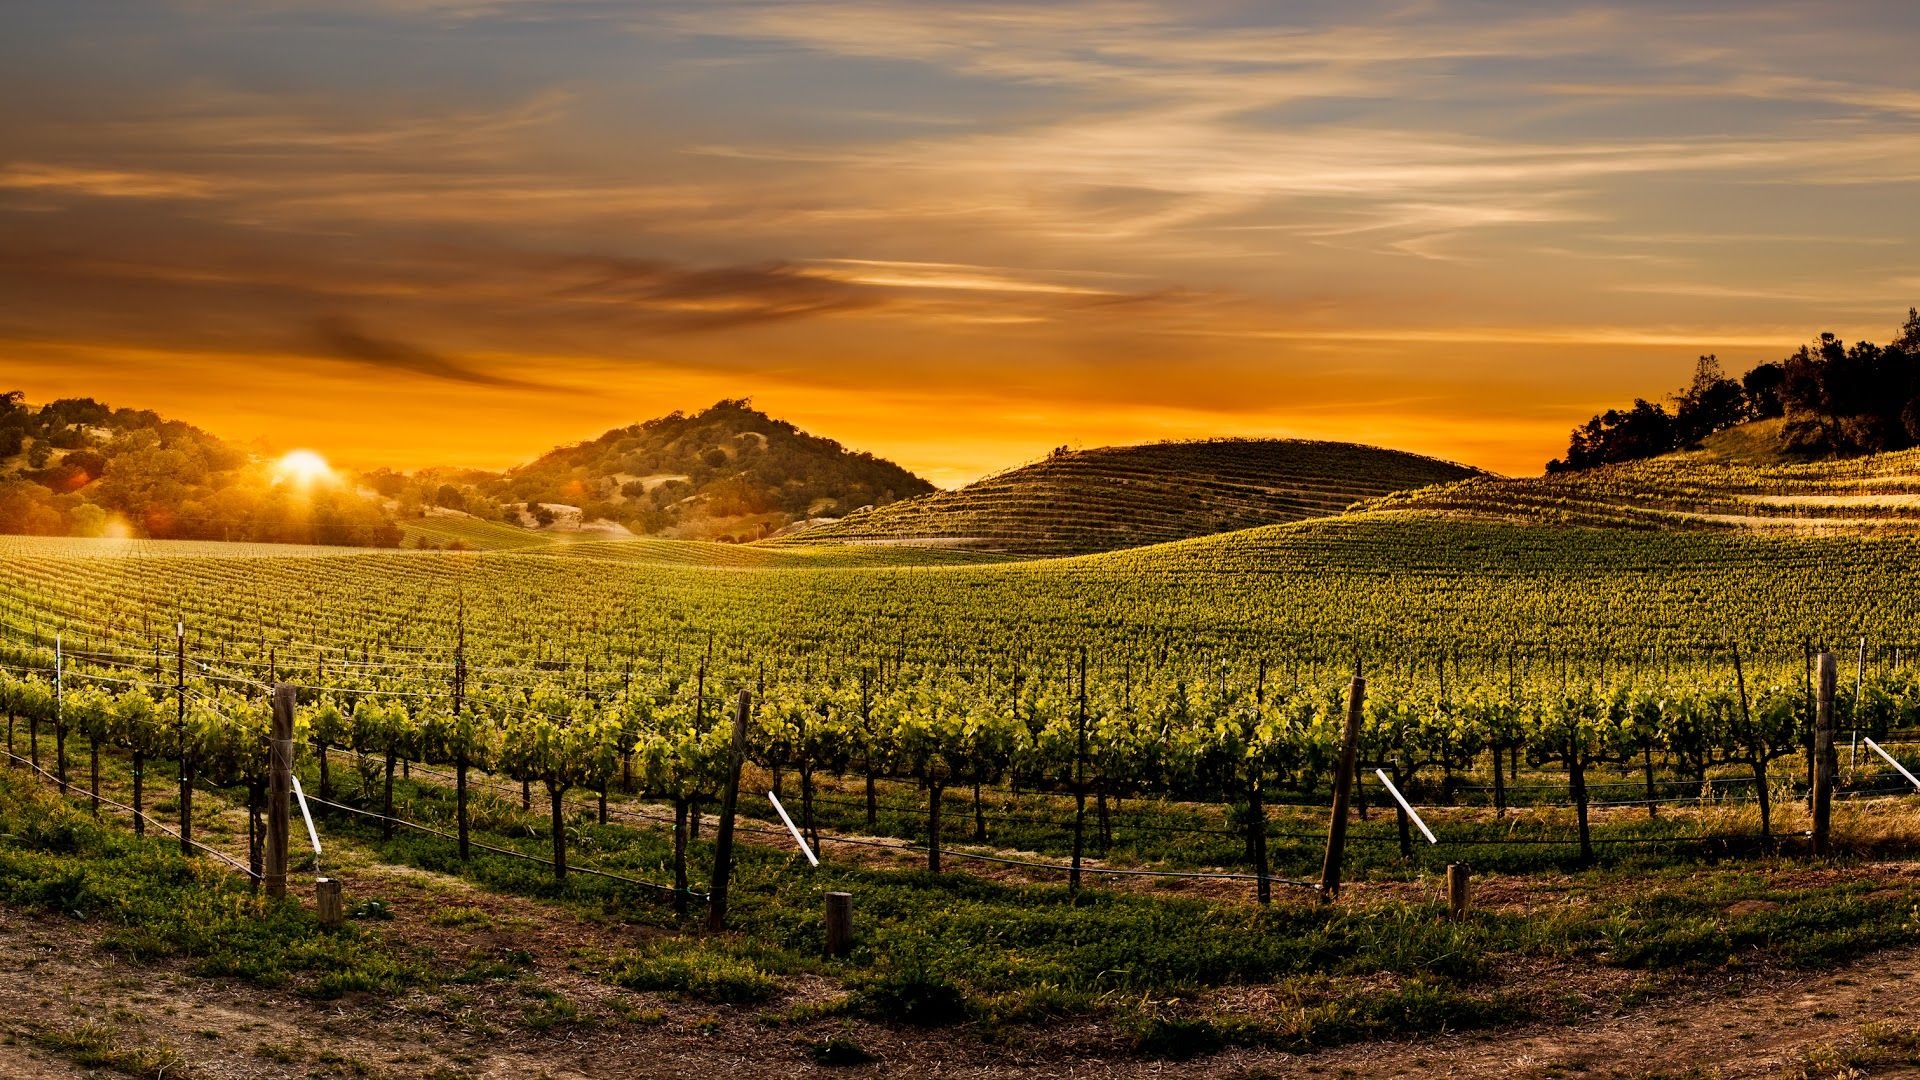 Napa wallpapers, Stunning backgrounds, Captivating scenery, Wallpaper Access, 1920x1080 Full HD Desktop